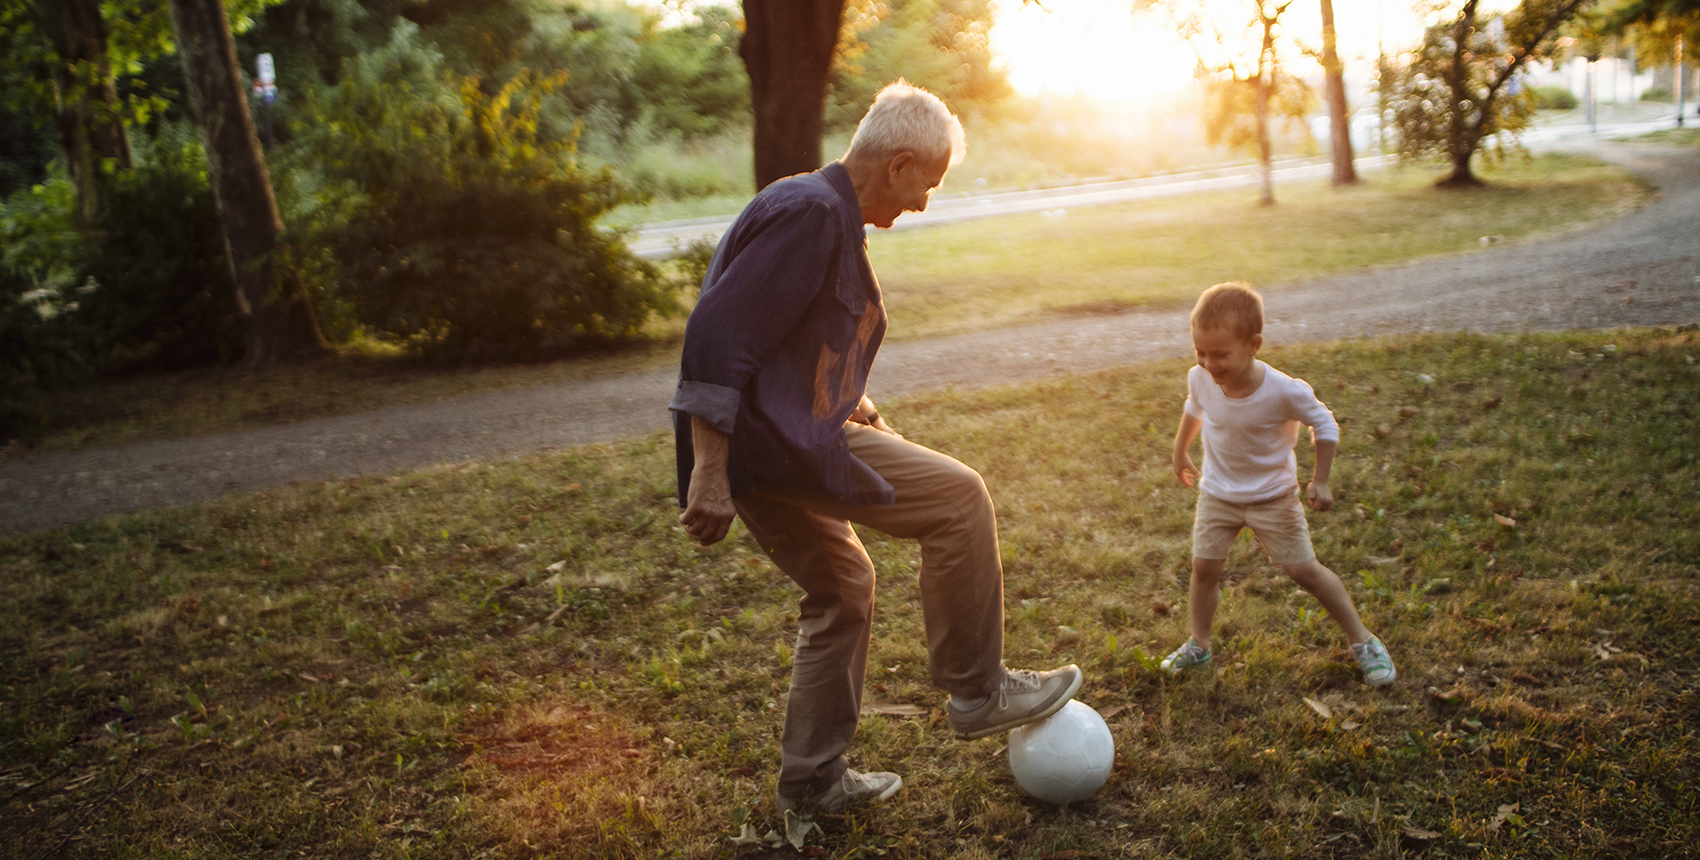 Caught in the middle of a one-on-one soccer game, a white-haired man stands with his foot on a soccer ball, a small child faces him, poised to take the ball.